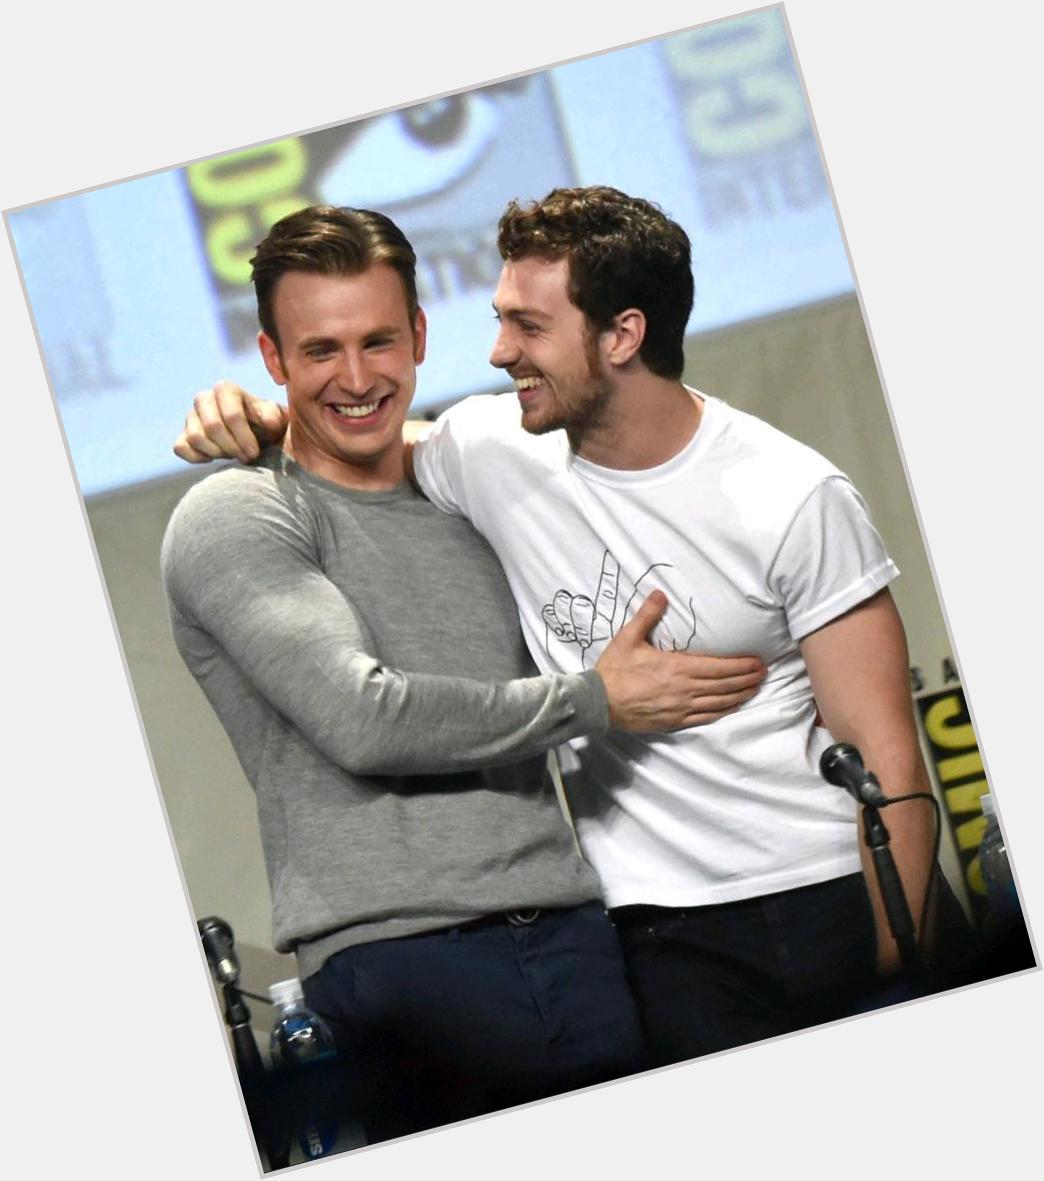 HAPPY BIRTHDAY TO THESE TWO HEROES ! 

Chris Evans and Aaron Taylor-Johnson 